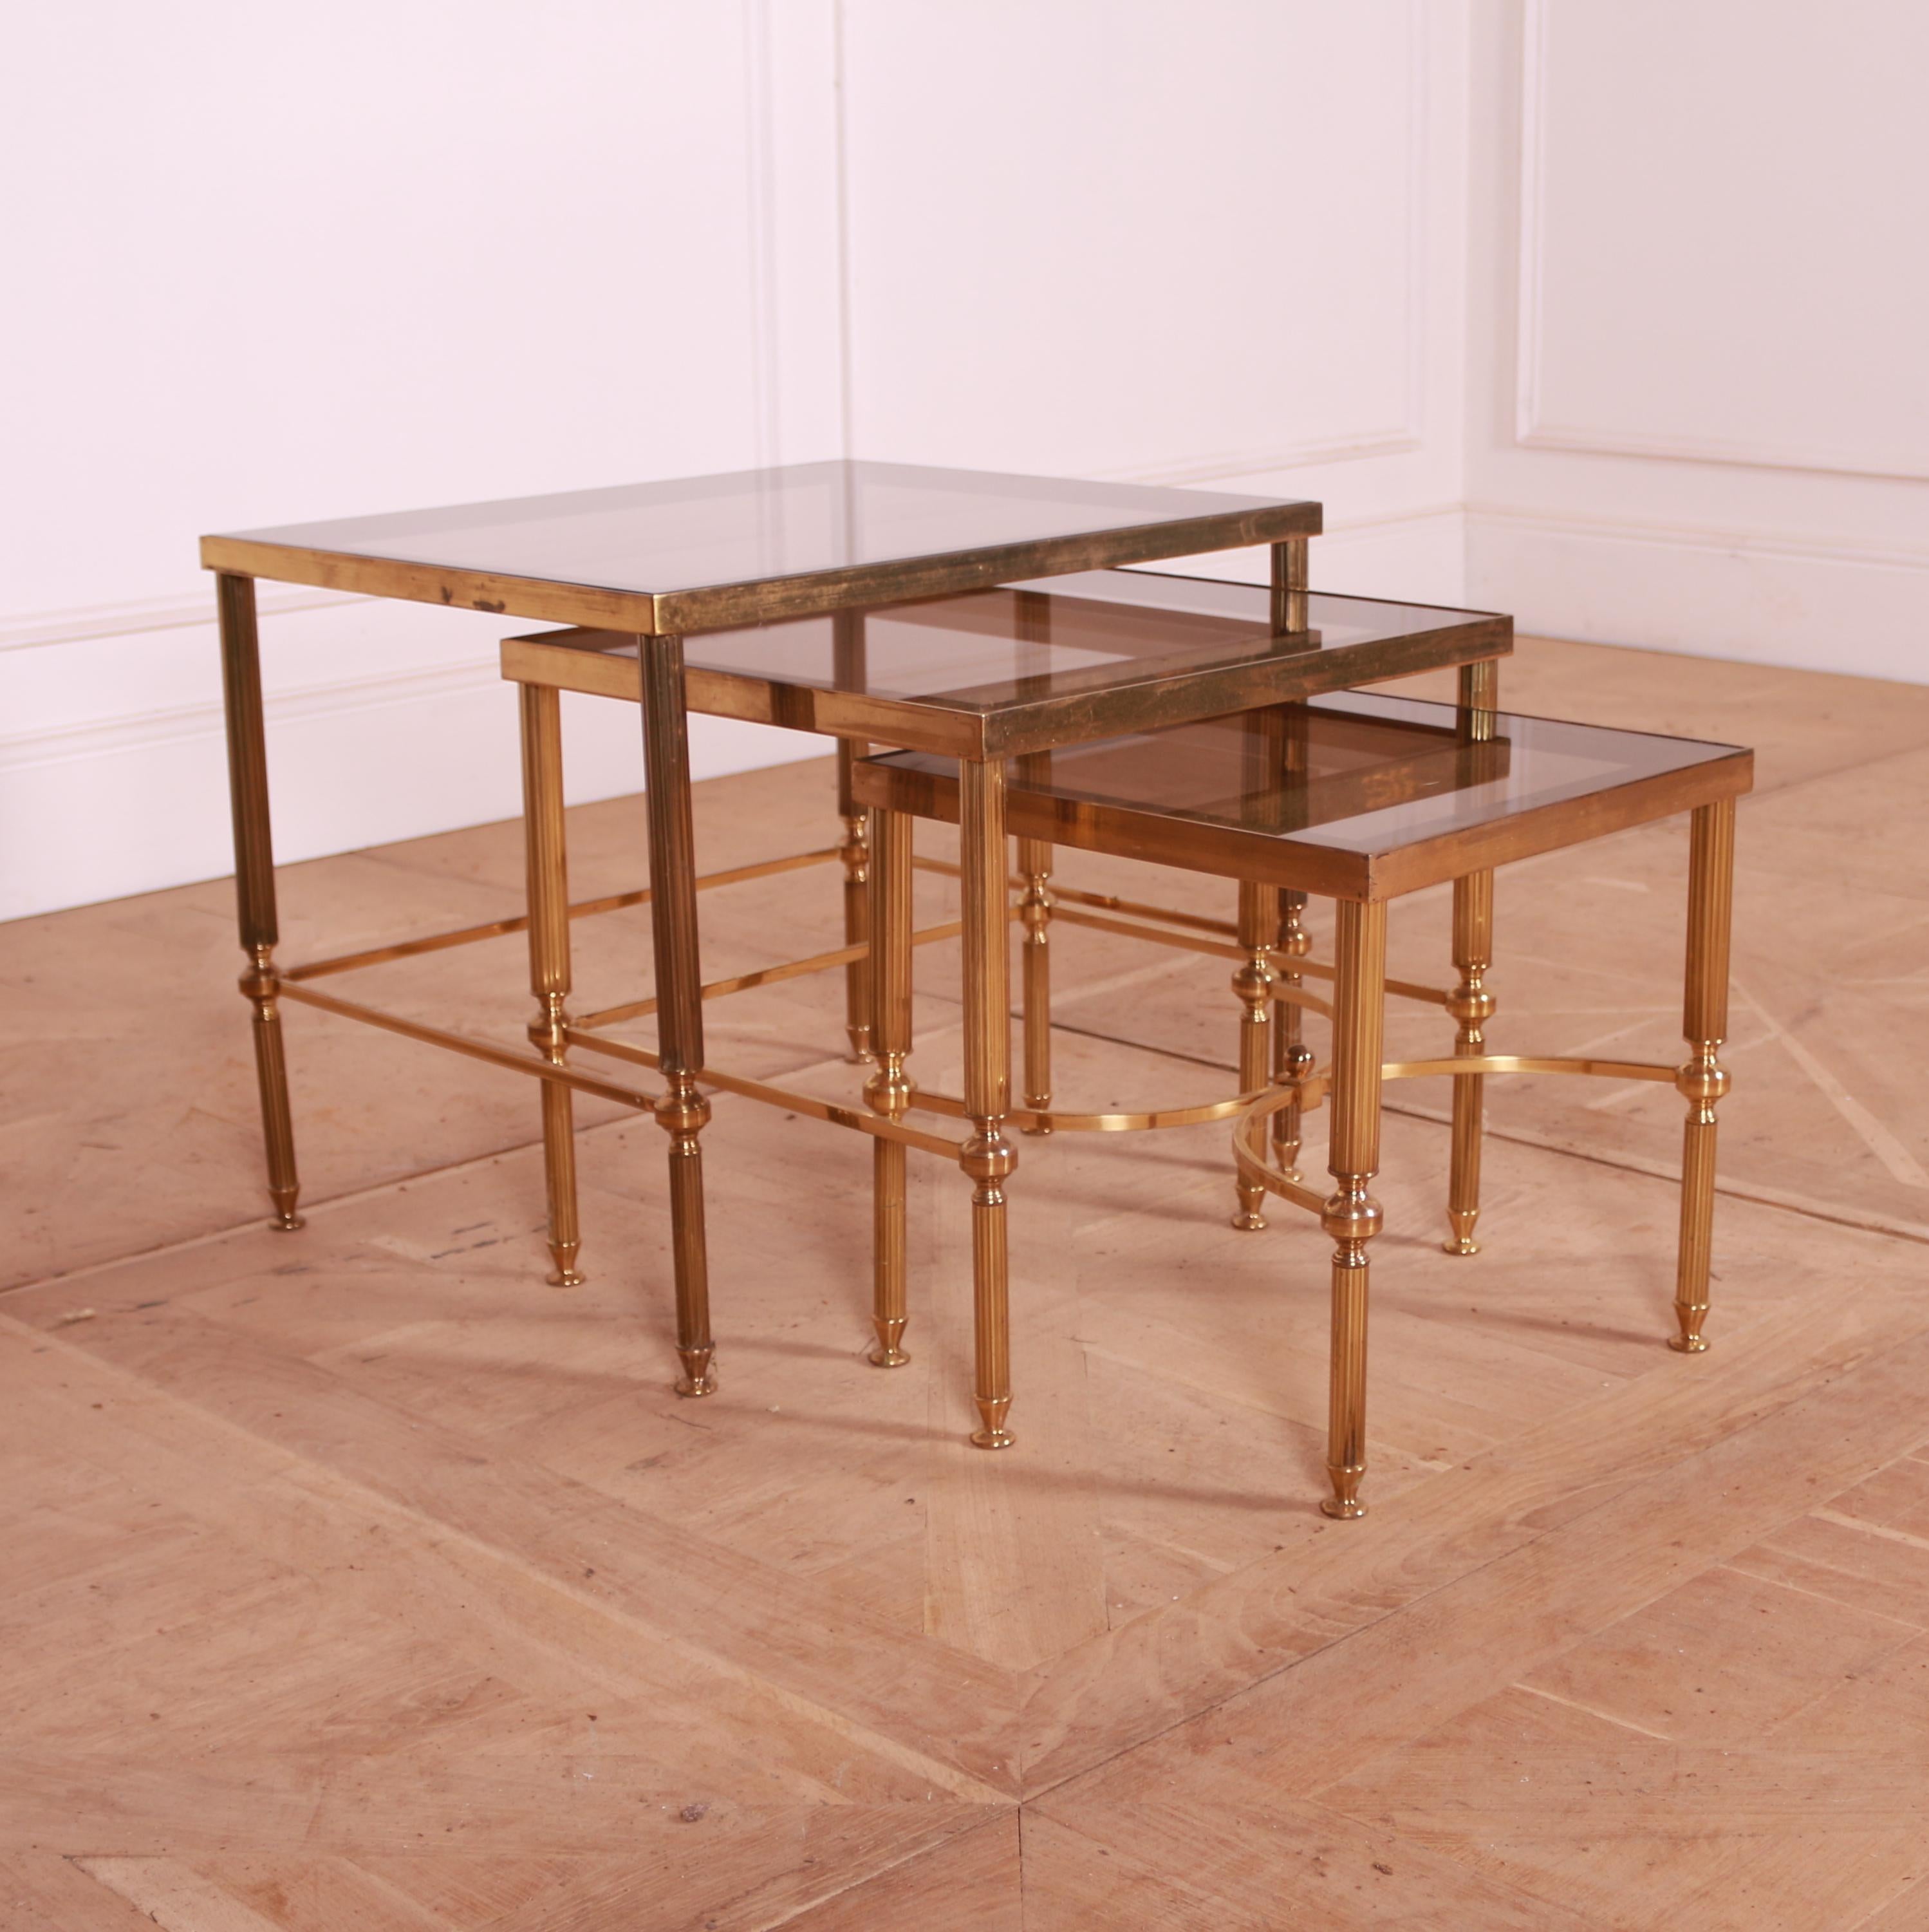 French brass and glass nesting tables. 1950.

Smallest table is 14